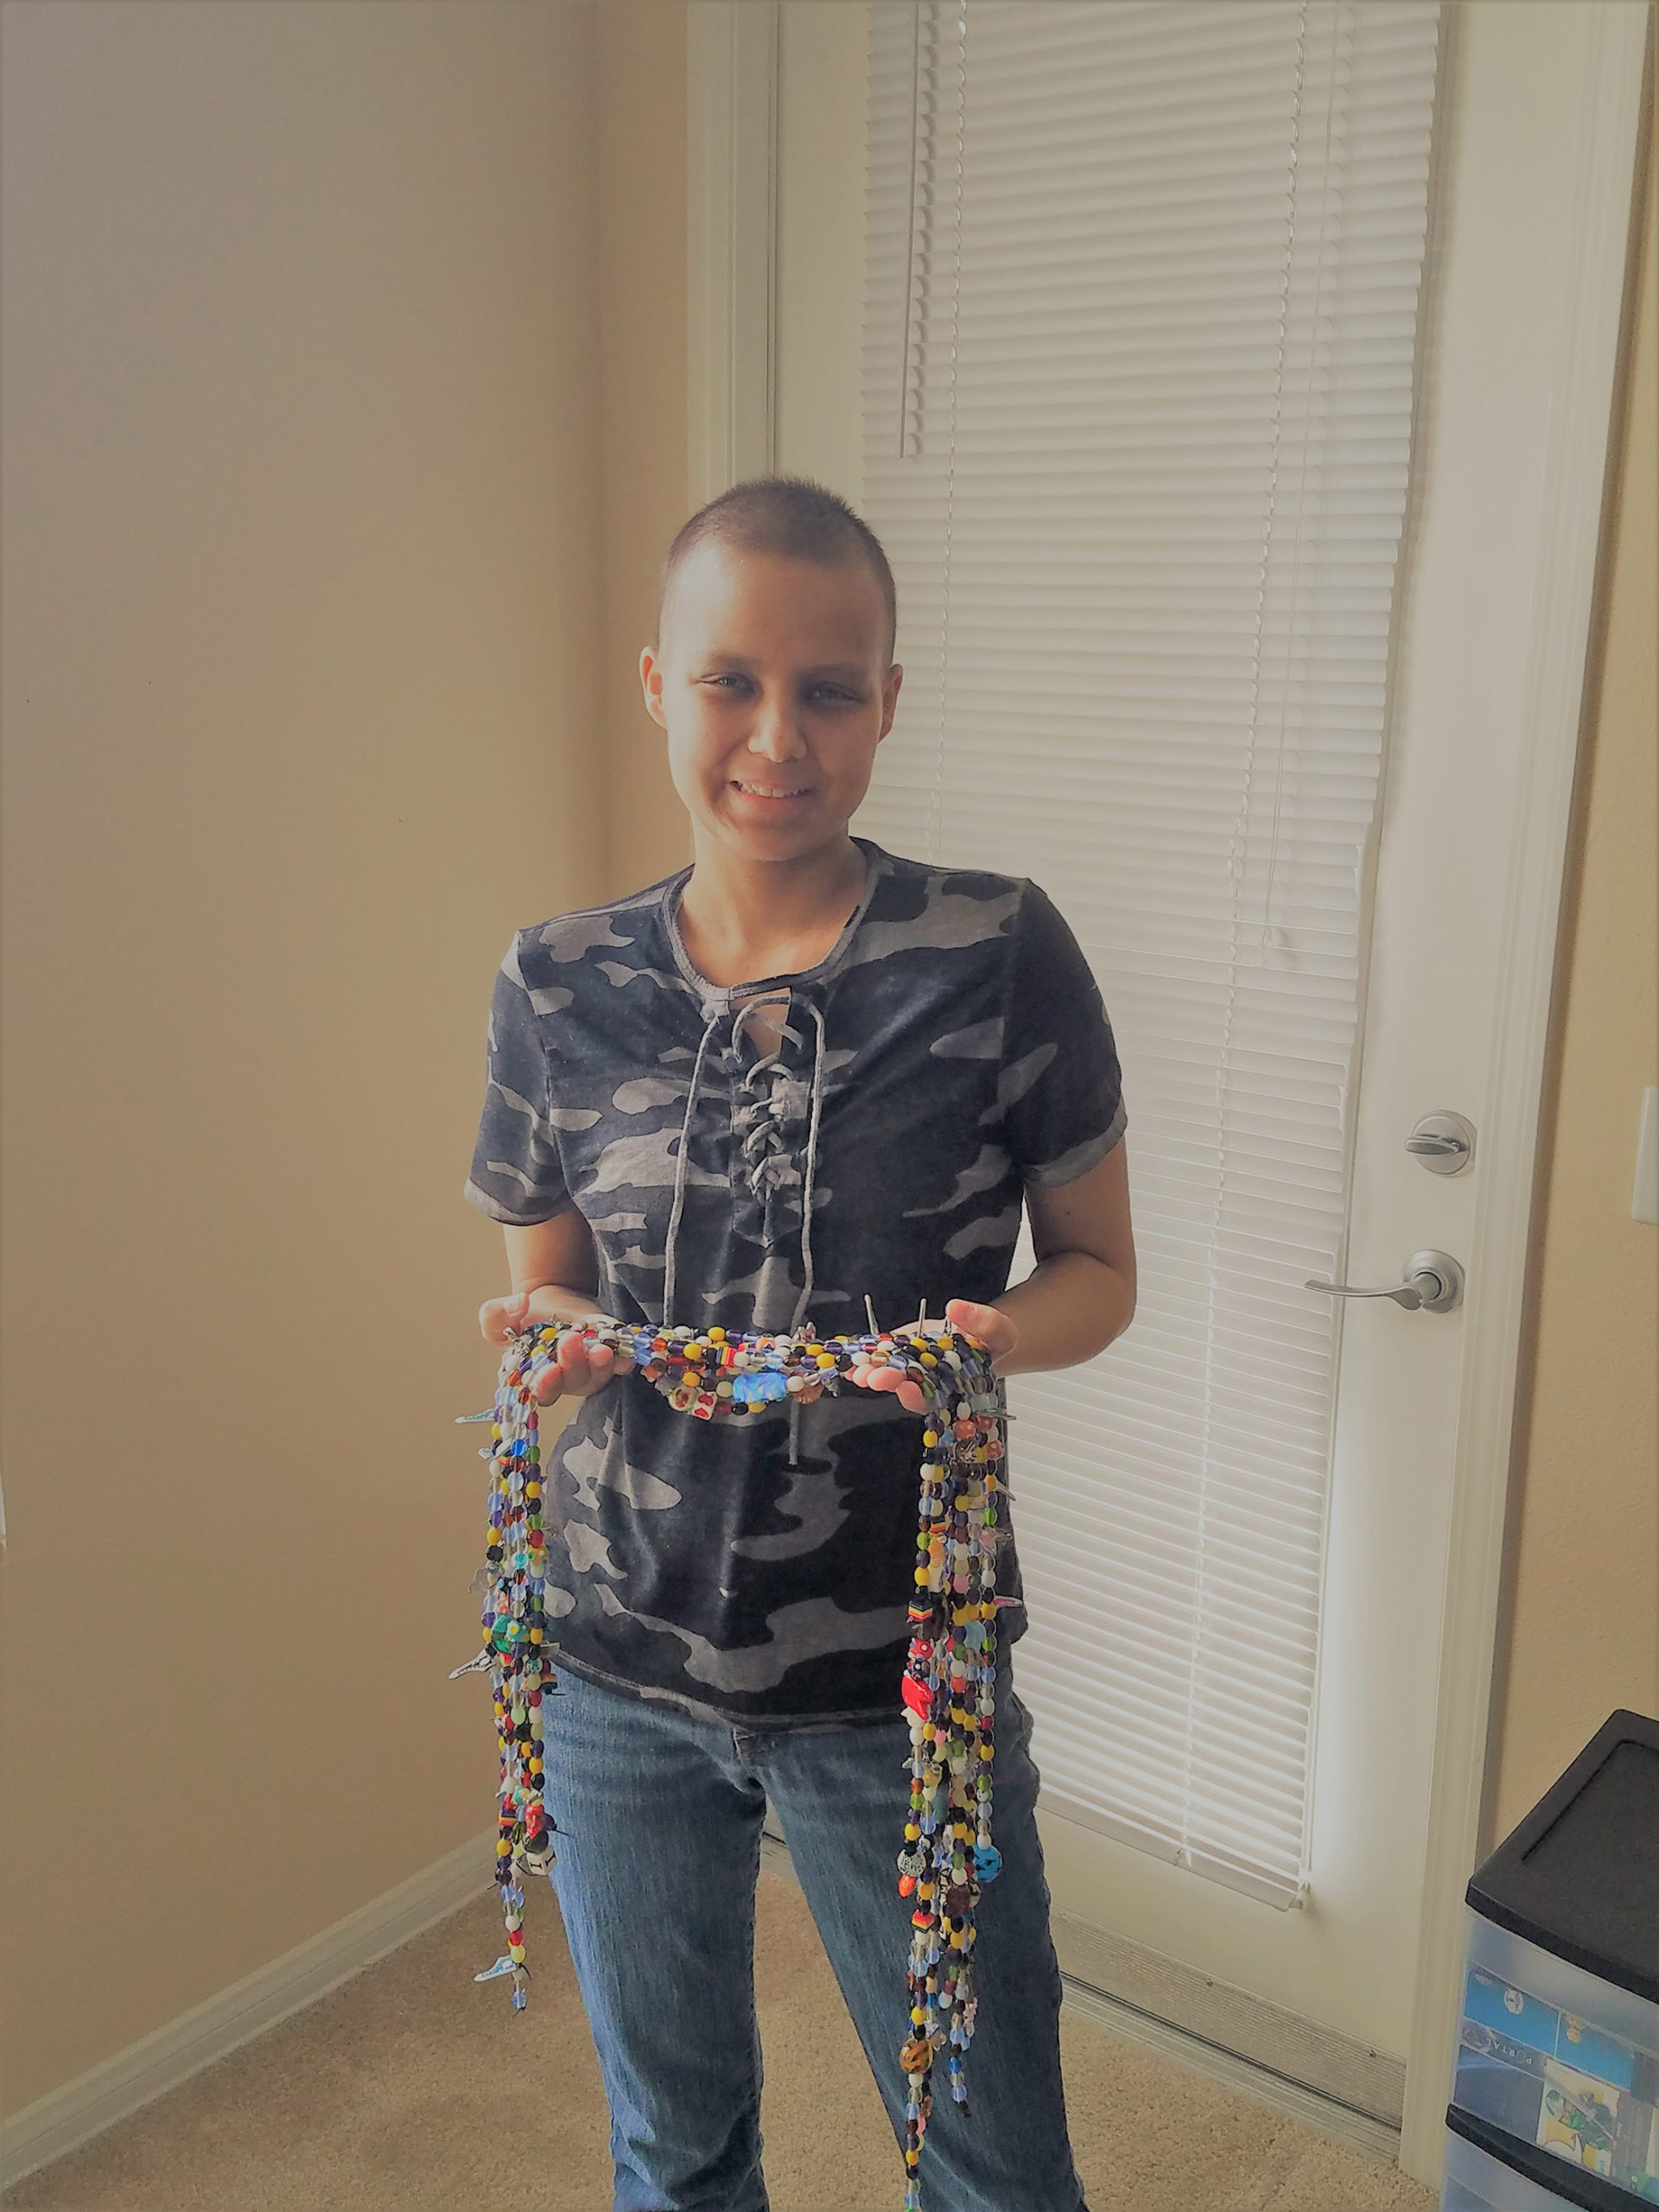 CHOC oncology patient Emma posing with strings of beads in her hands